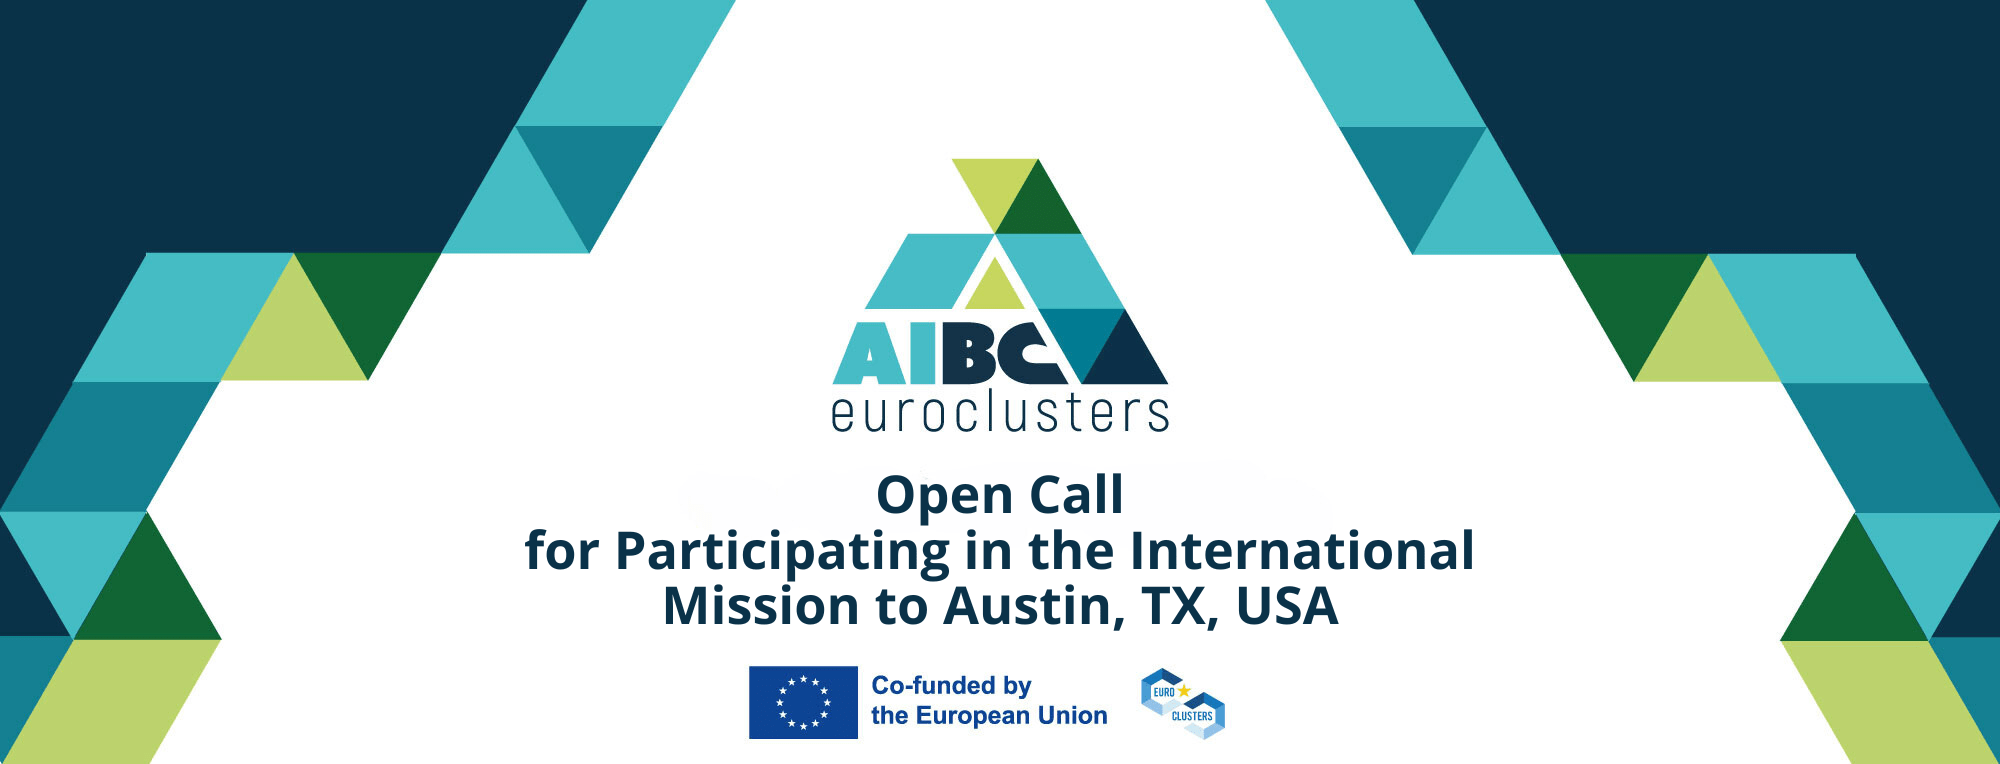 AIBC Eurocluster Open Call for Participating in the International Mission to Austin, TX, USA